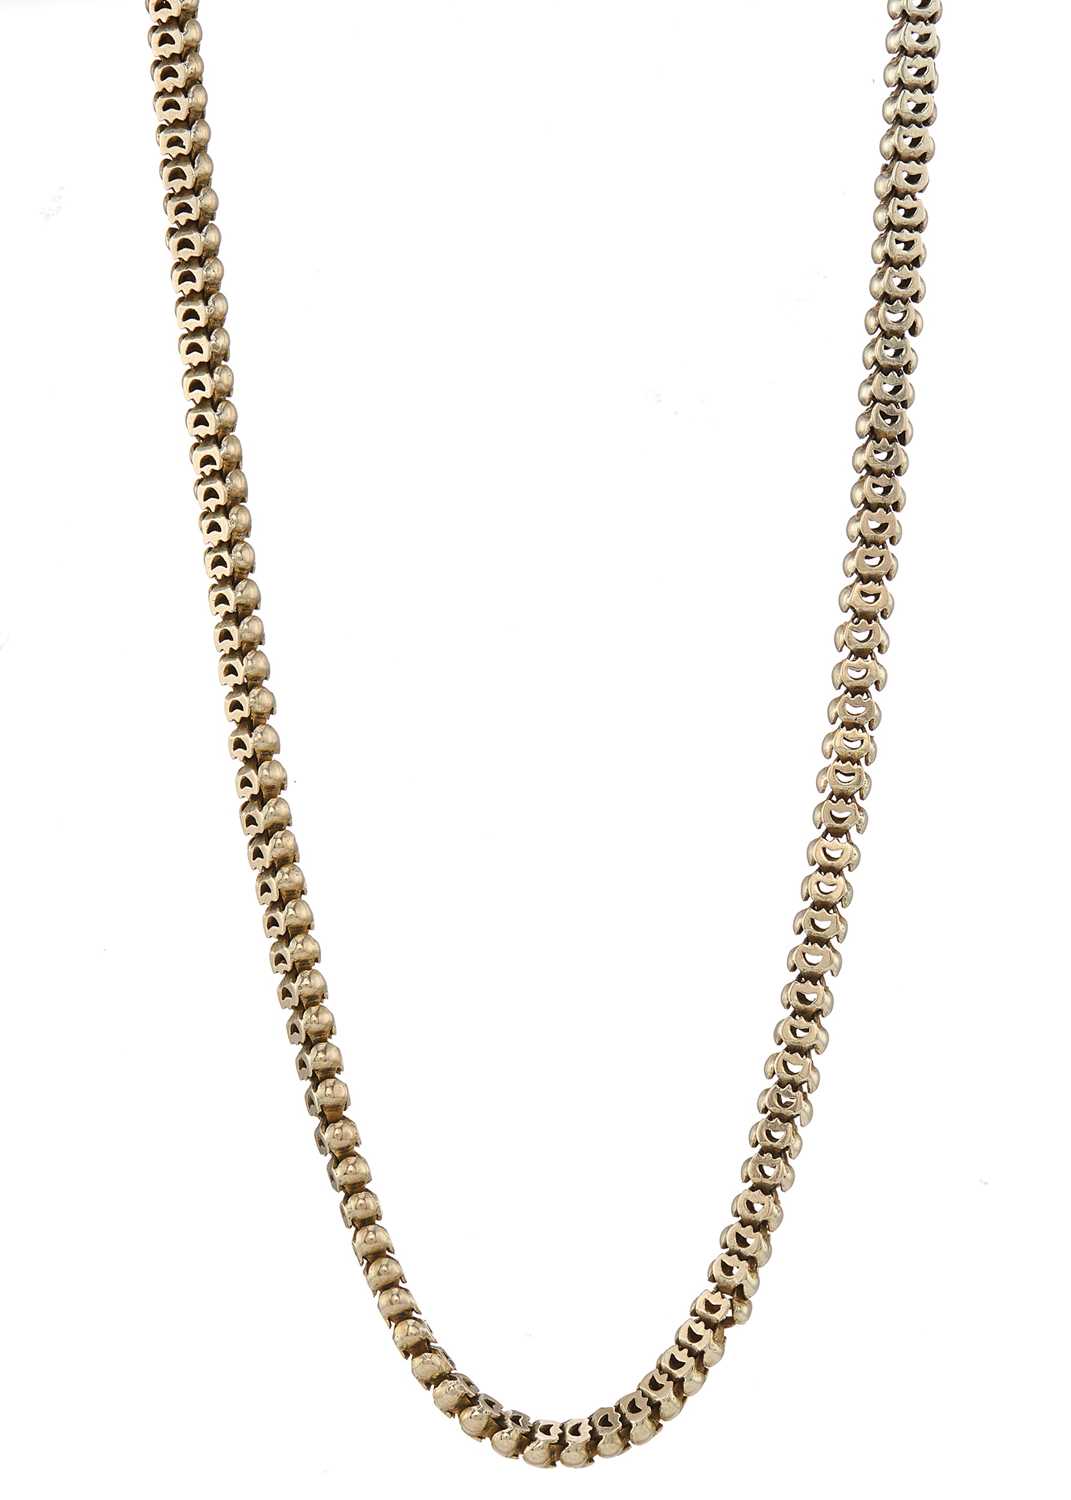 Lot 21 - A late Victorian 9ct gold longuard chain necklace